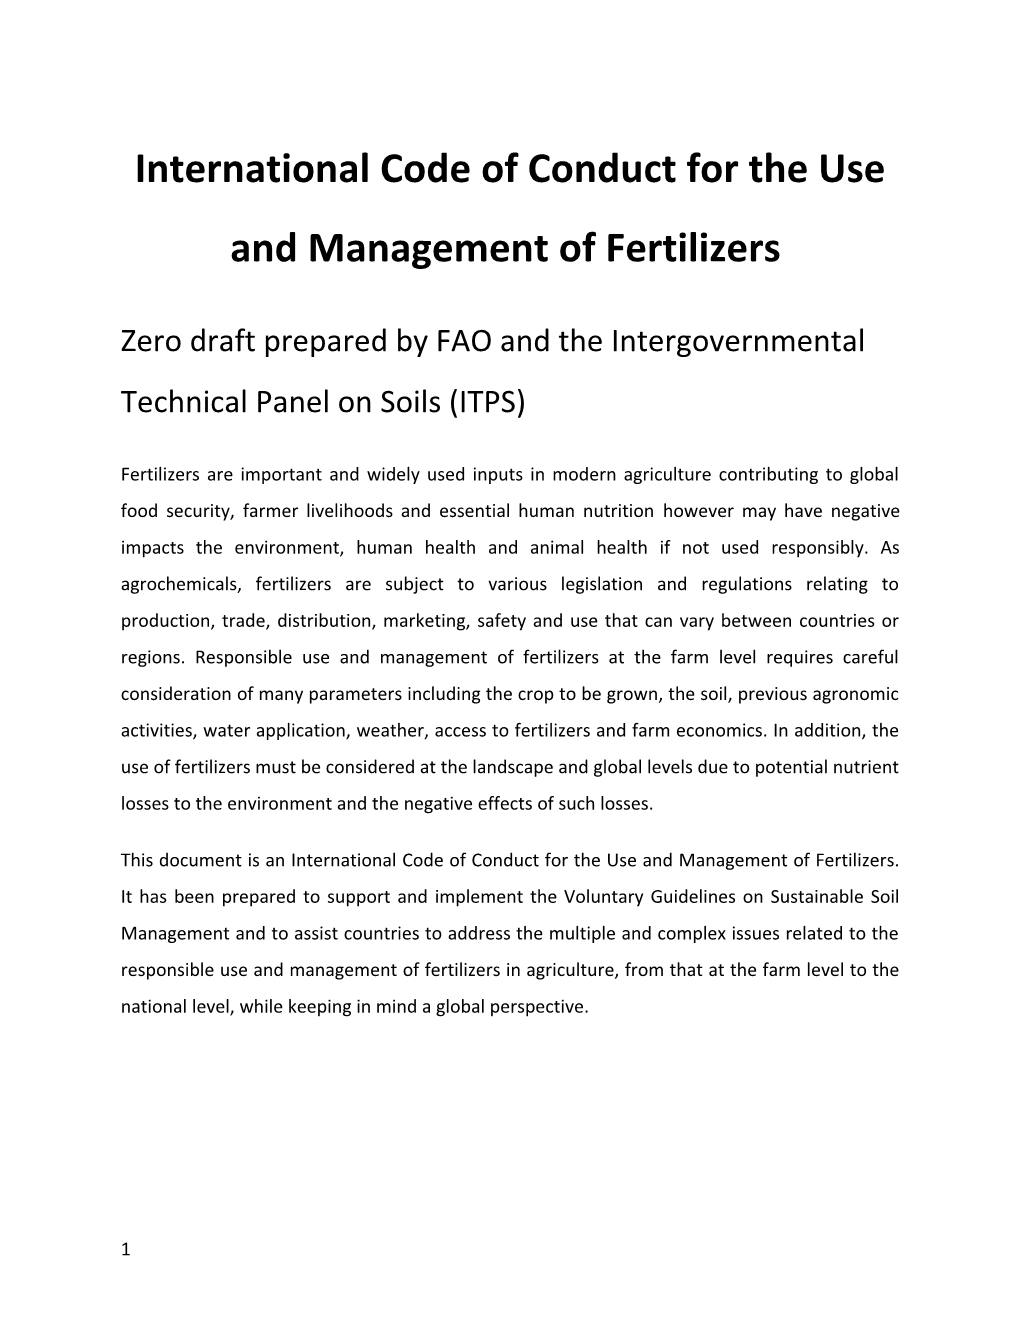 International Code of Conduct for the Use and Management of Fertilizers